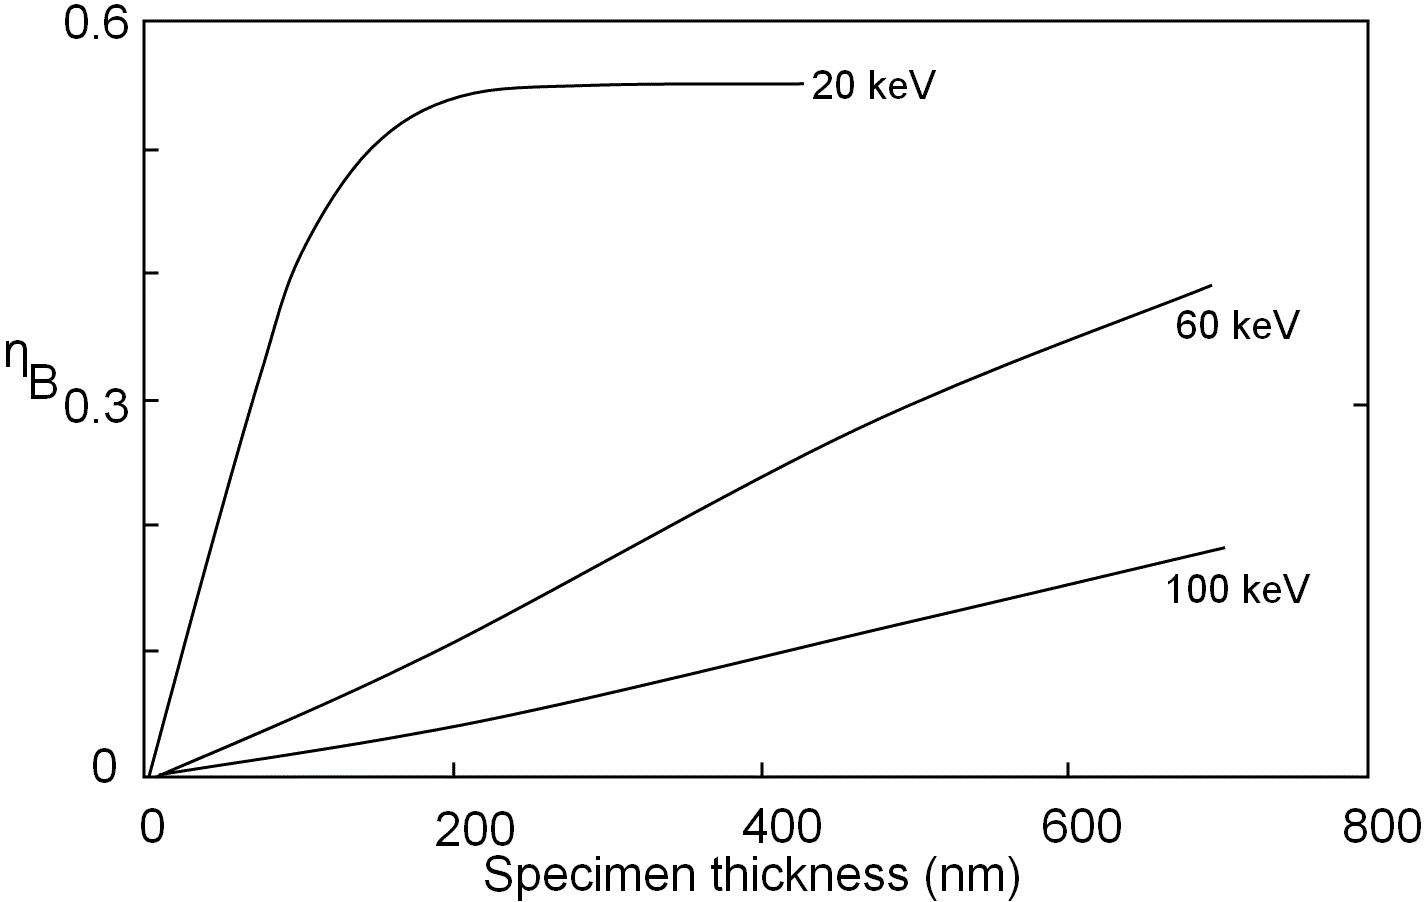 Fraction of transmitted electrons at different accelerating voltages